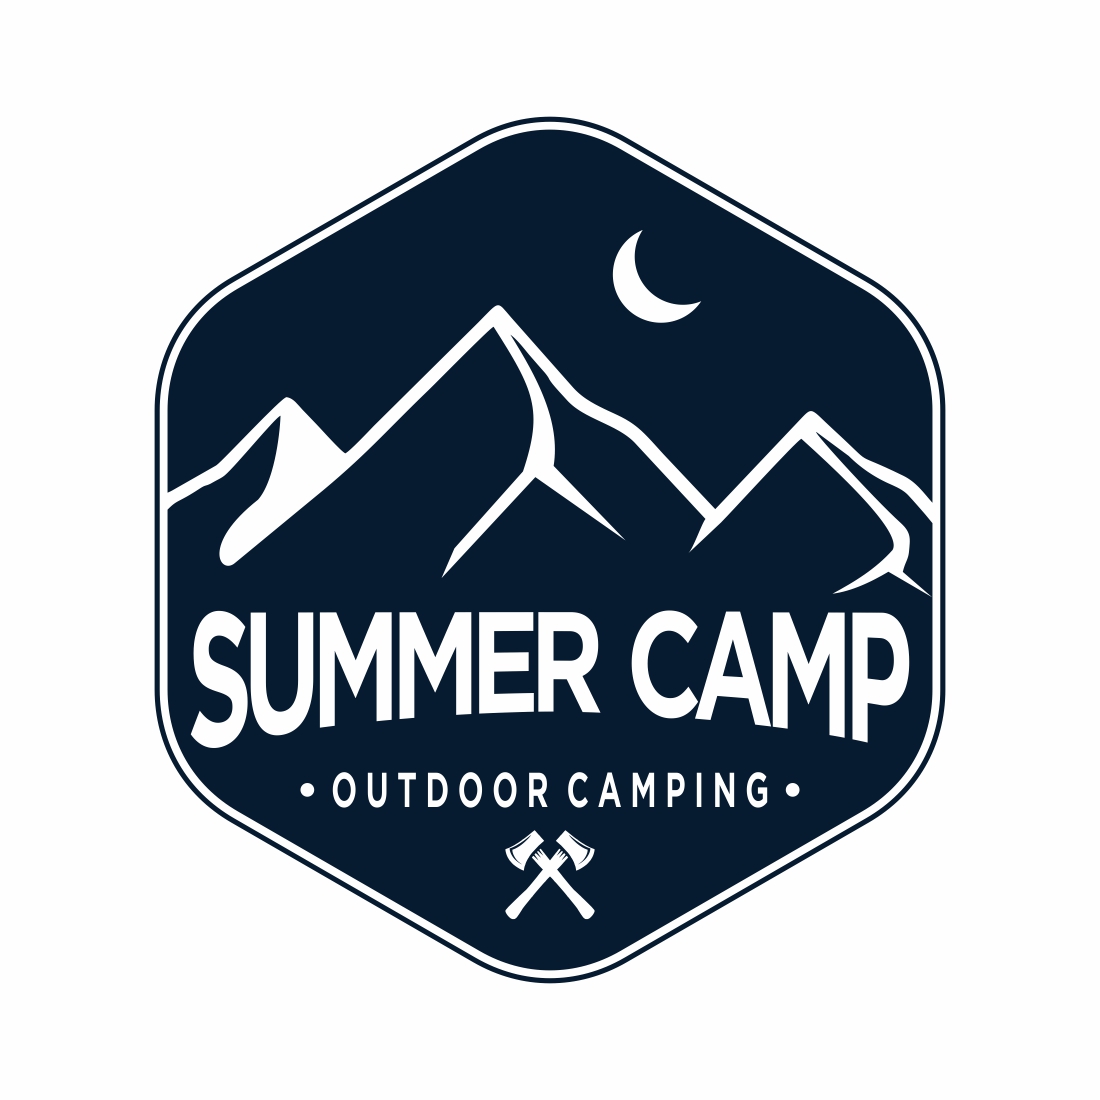 Illustration of a nighttime mountain camping logo design cover image.